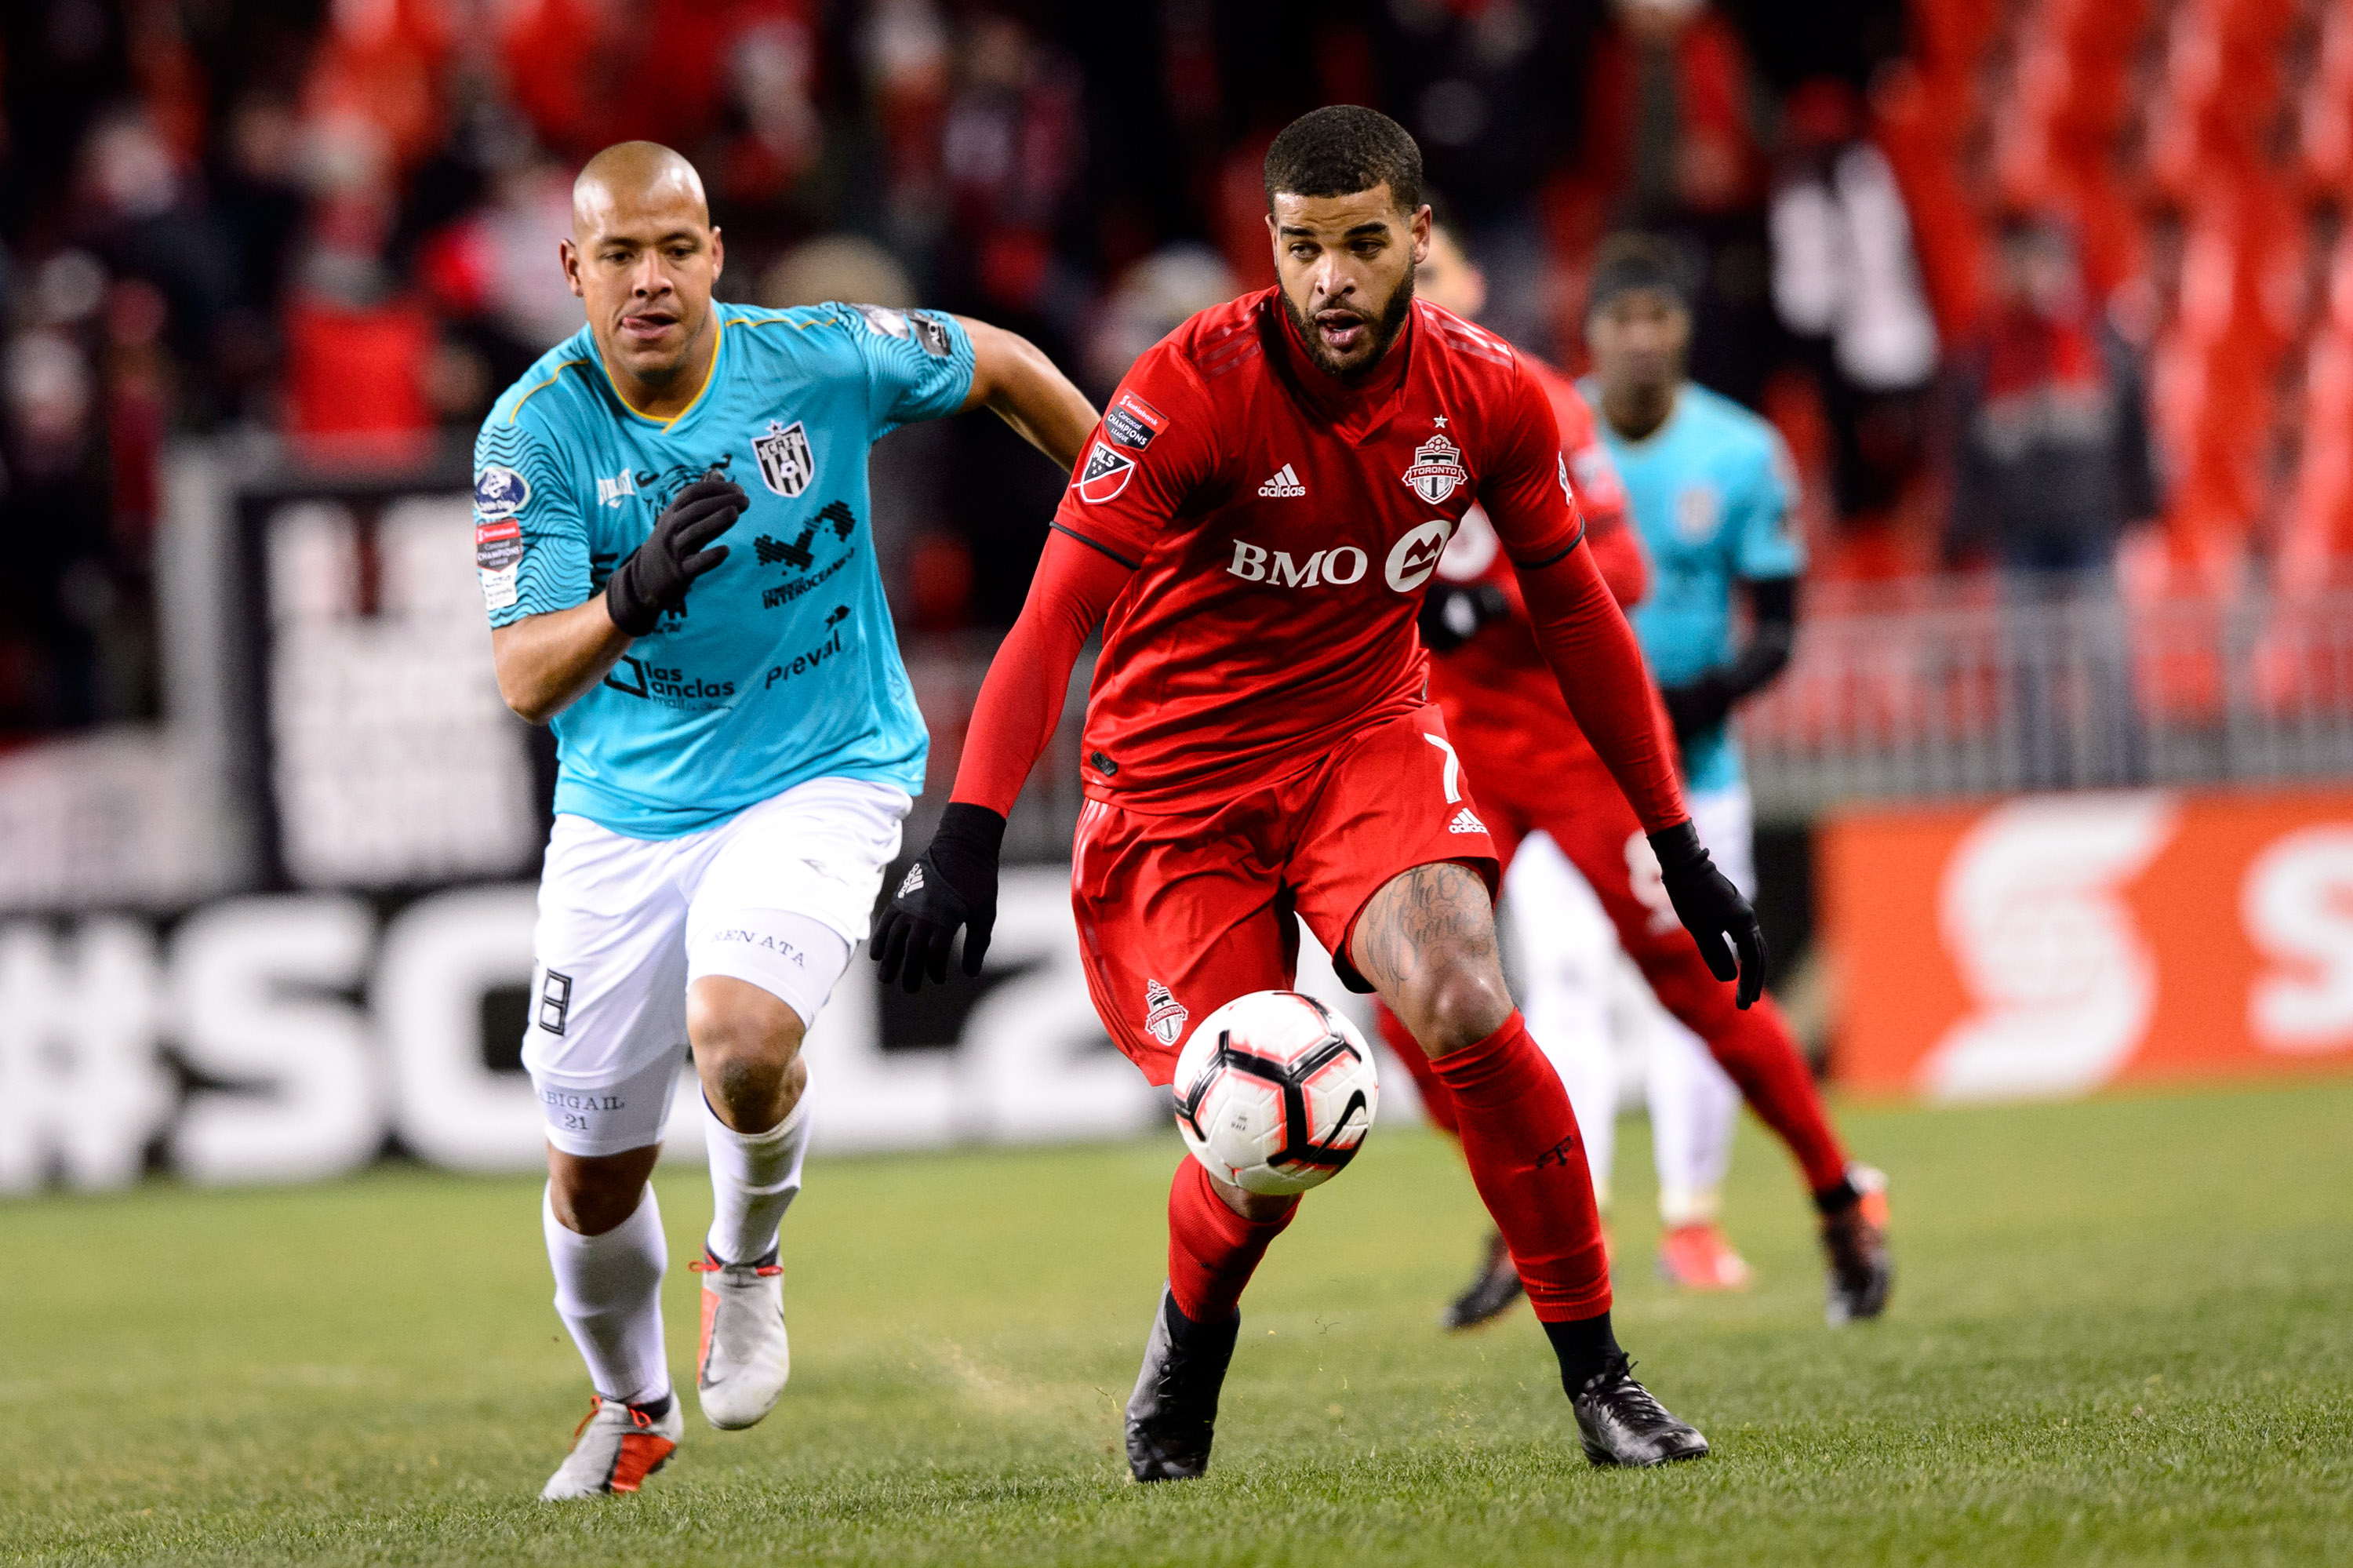 SOCCER: FEB 26 CONCACAF Champions League Round of 16 - Toronto FC v Independiente